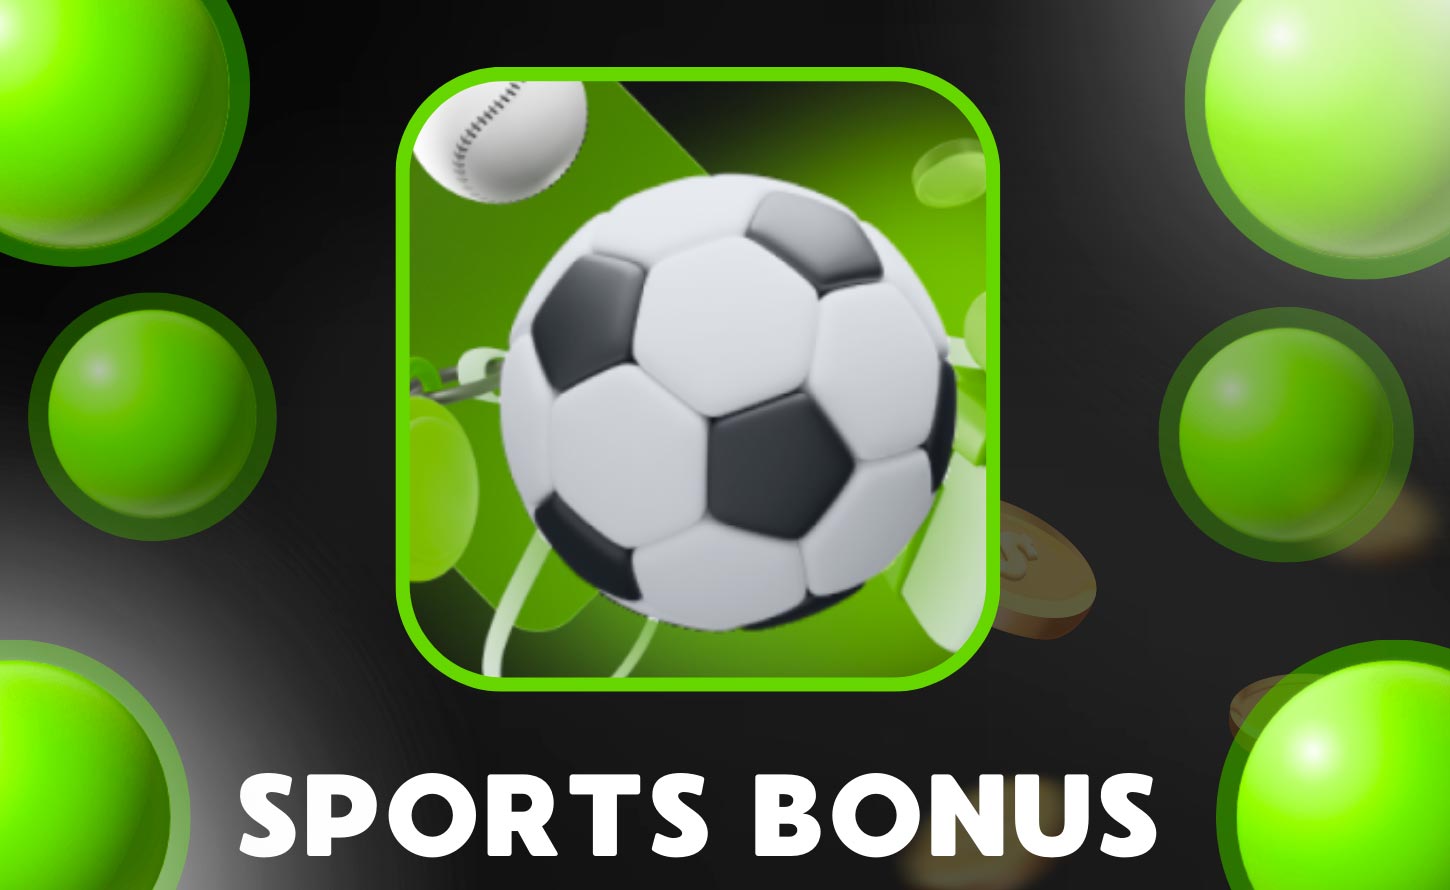 Get a 100% Sports Bonus of Up to BDT 13,540 on Your First Deposit!